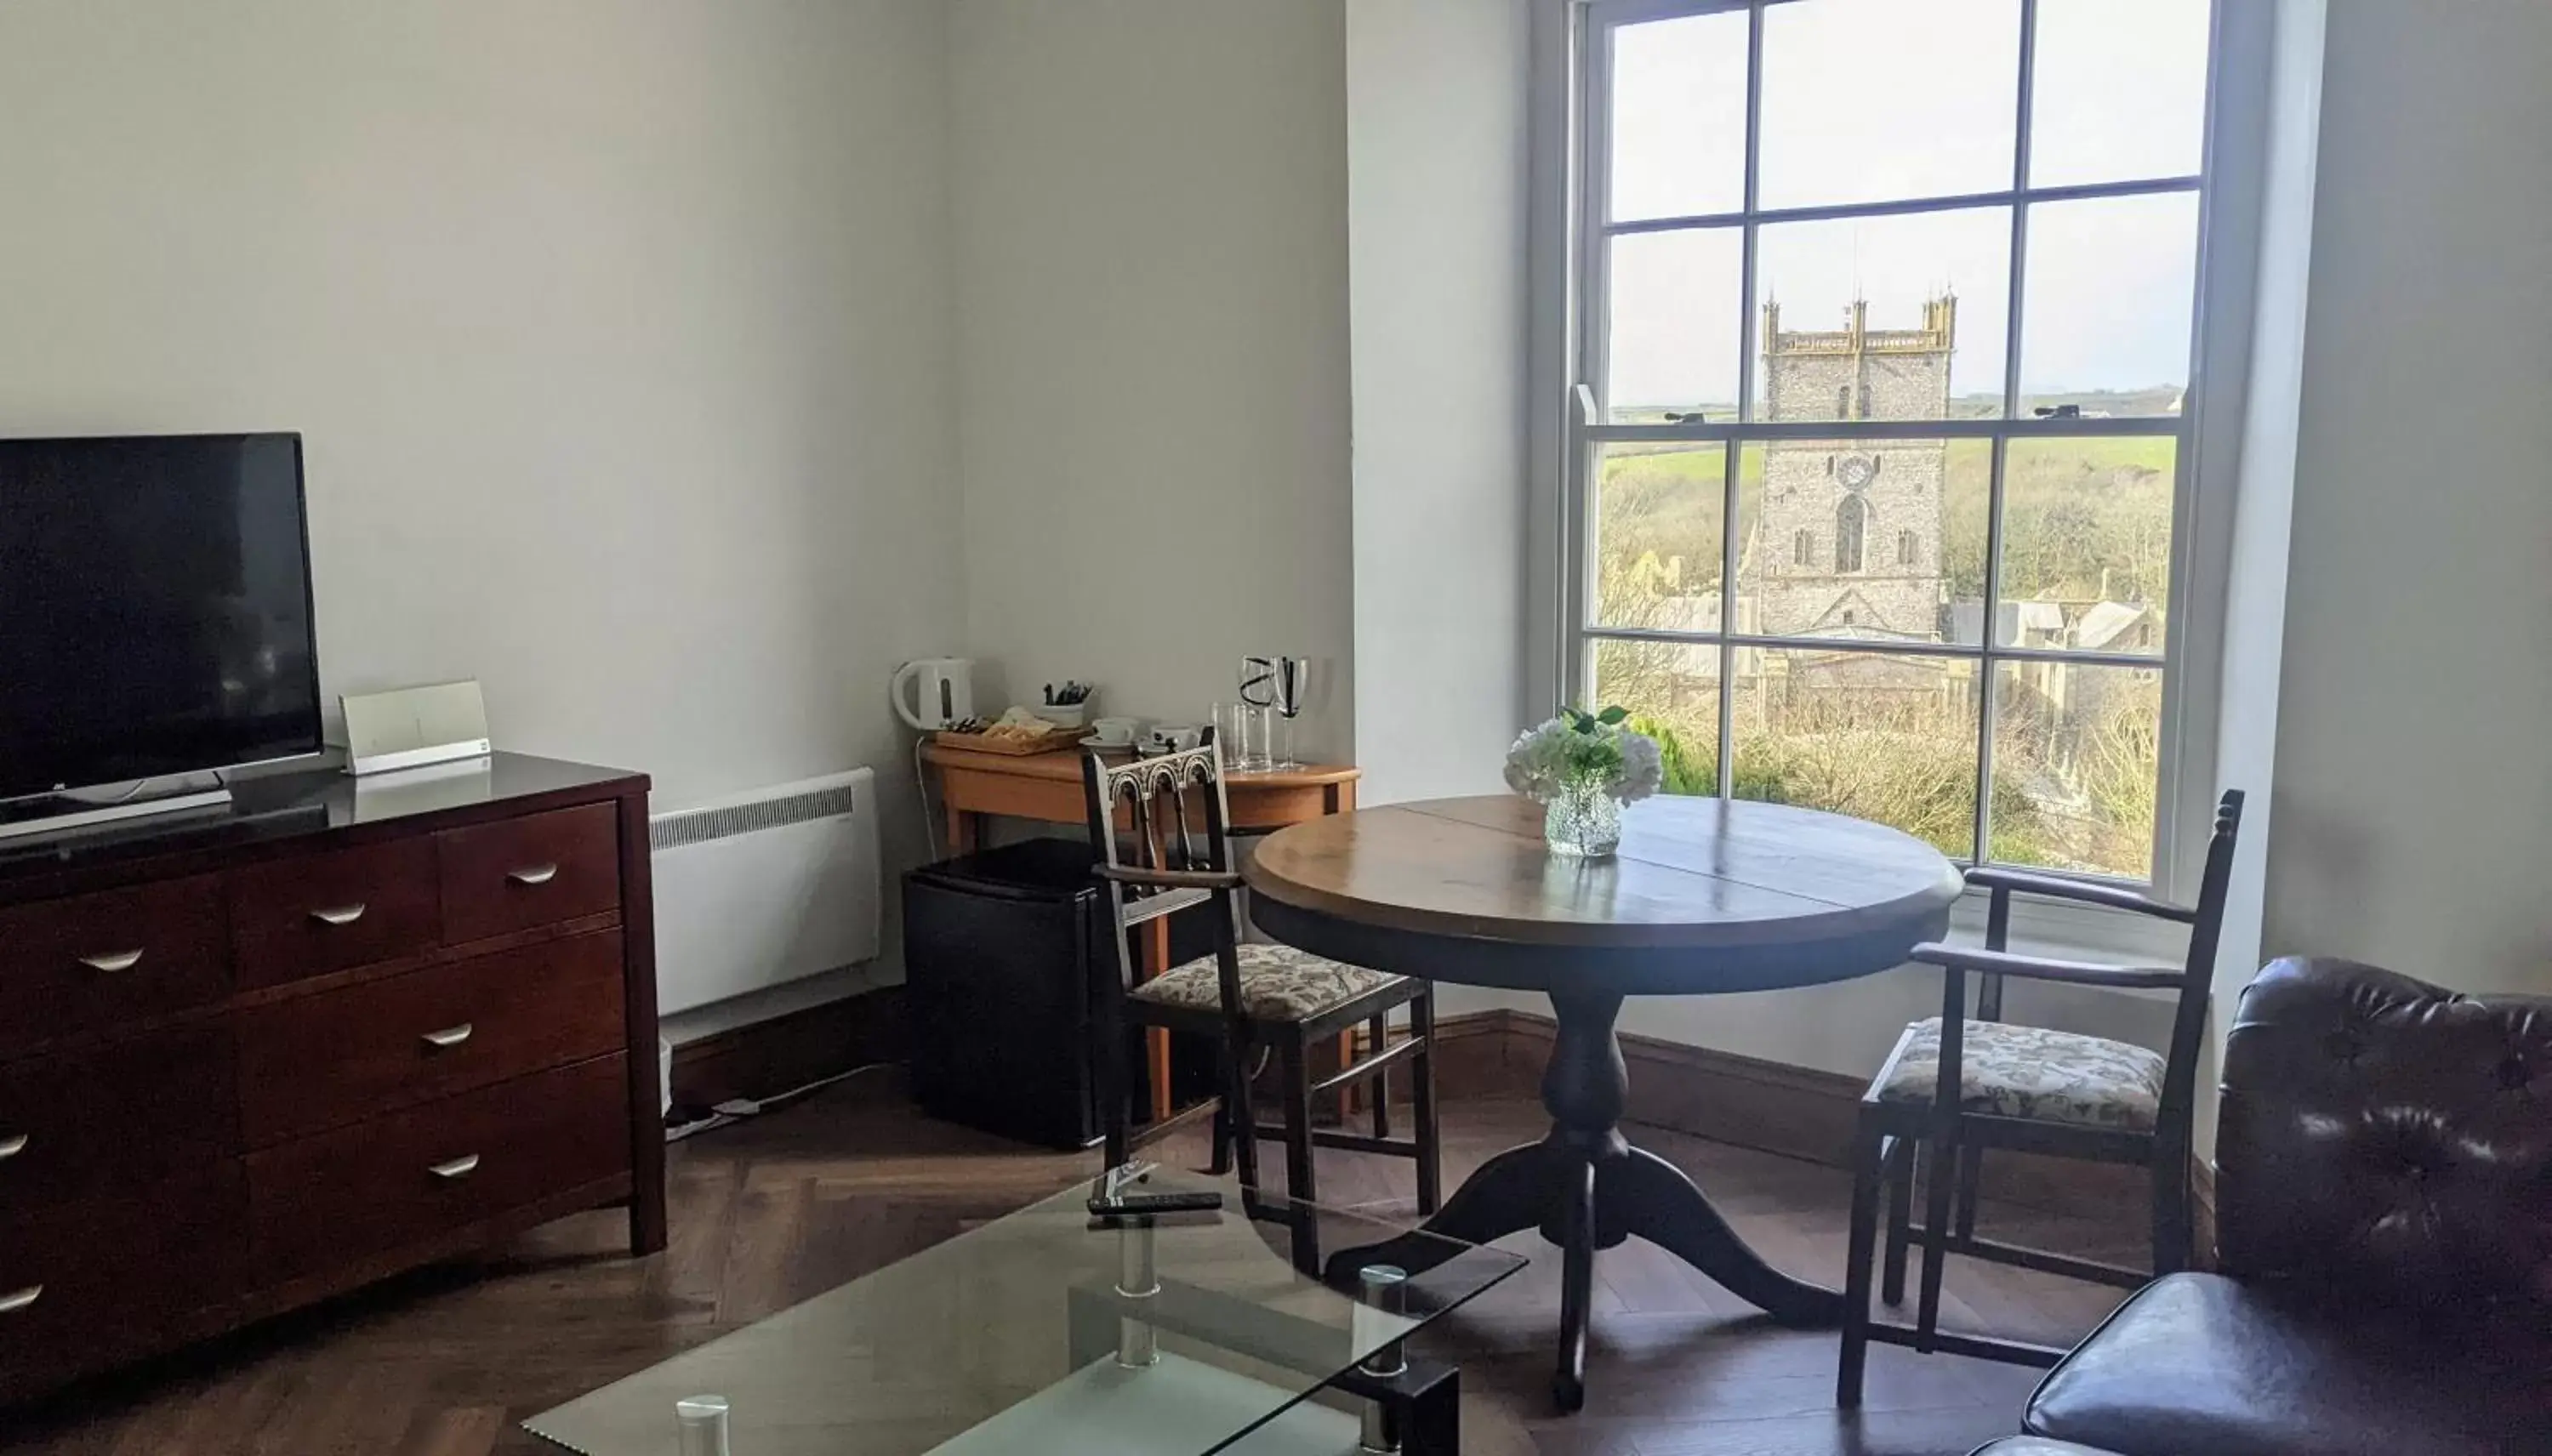 Deluxe Suite in St Davids Gin & Kitchen - The Cathedral Villas